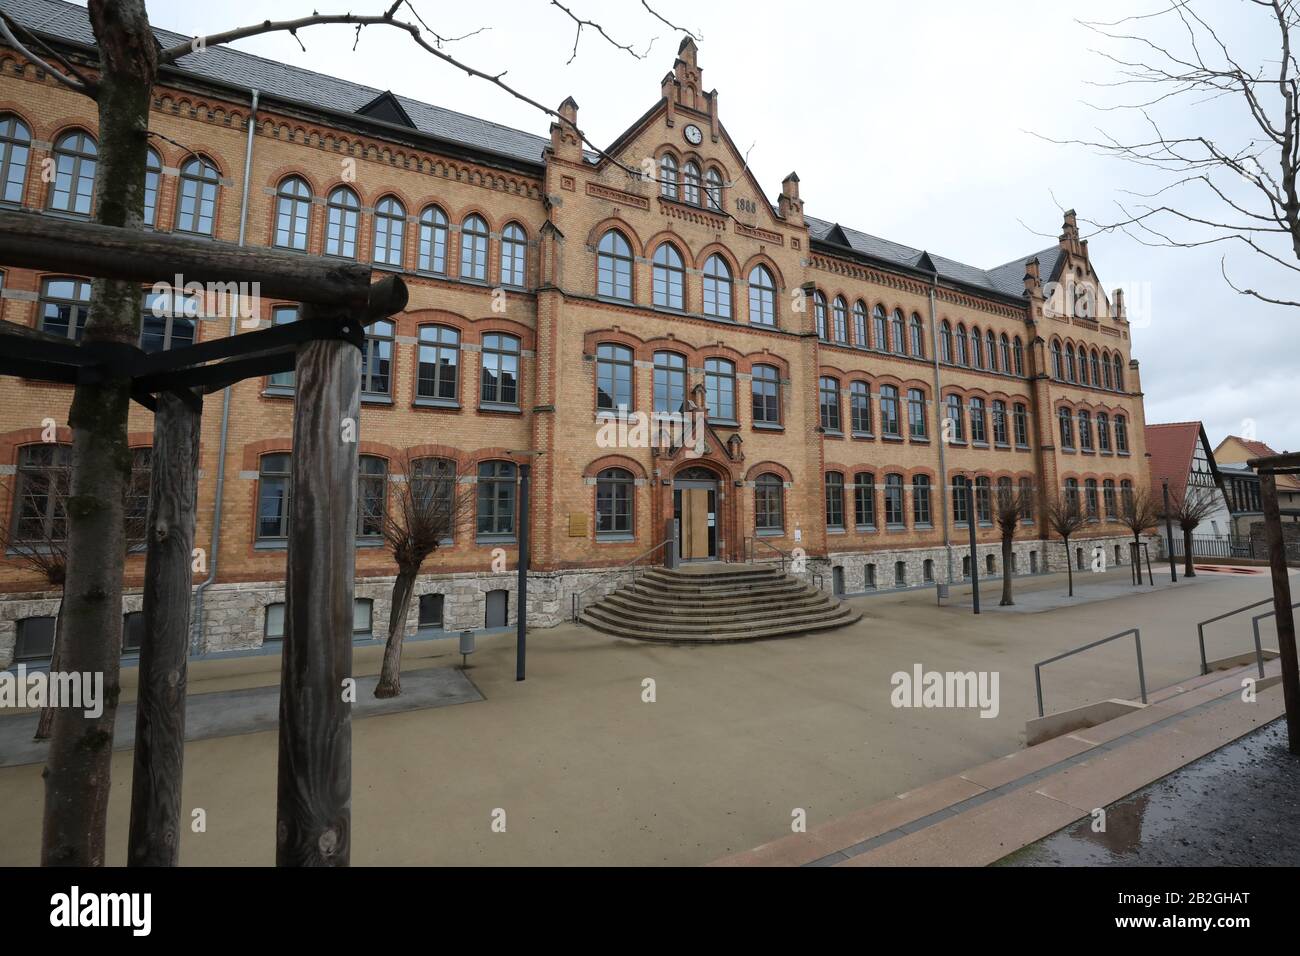 03 March 2020, Thuringia, Pößneck: The grammar school Am Weißen Turm is closed for the time being until 06.03.2020. Here there are two suspected cases of people infected with the coronavirus. Photo: Bodo Schackow/dpa-Zentralbild/dpa Stock Photo